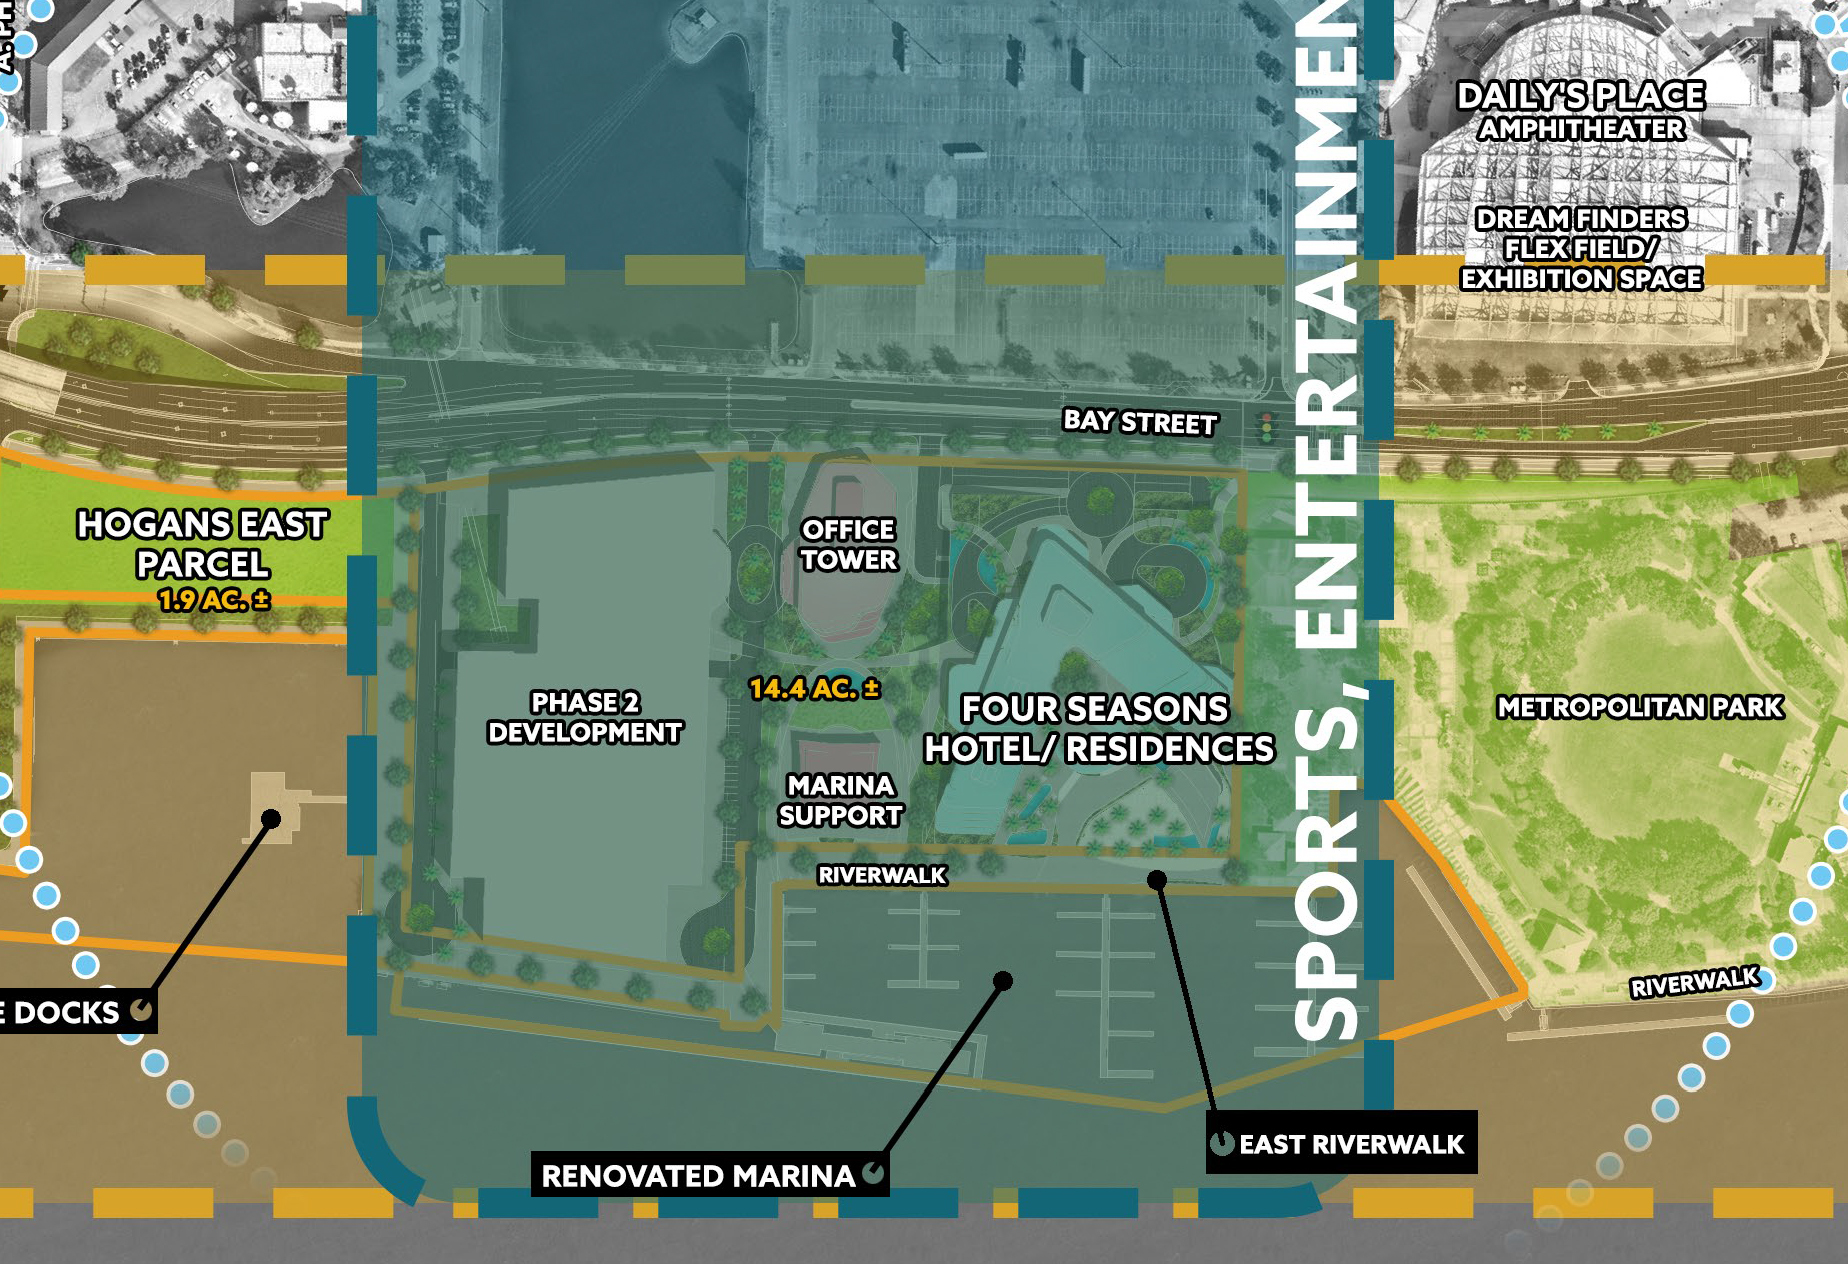 A map of the Shipyards development area.